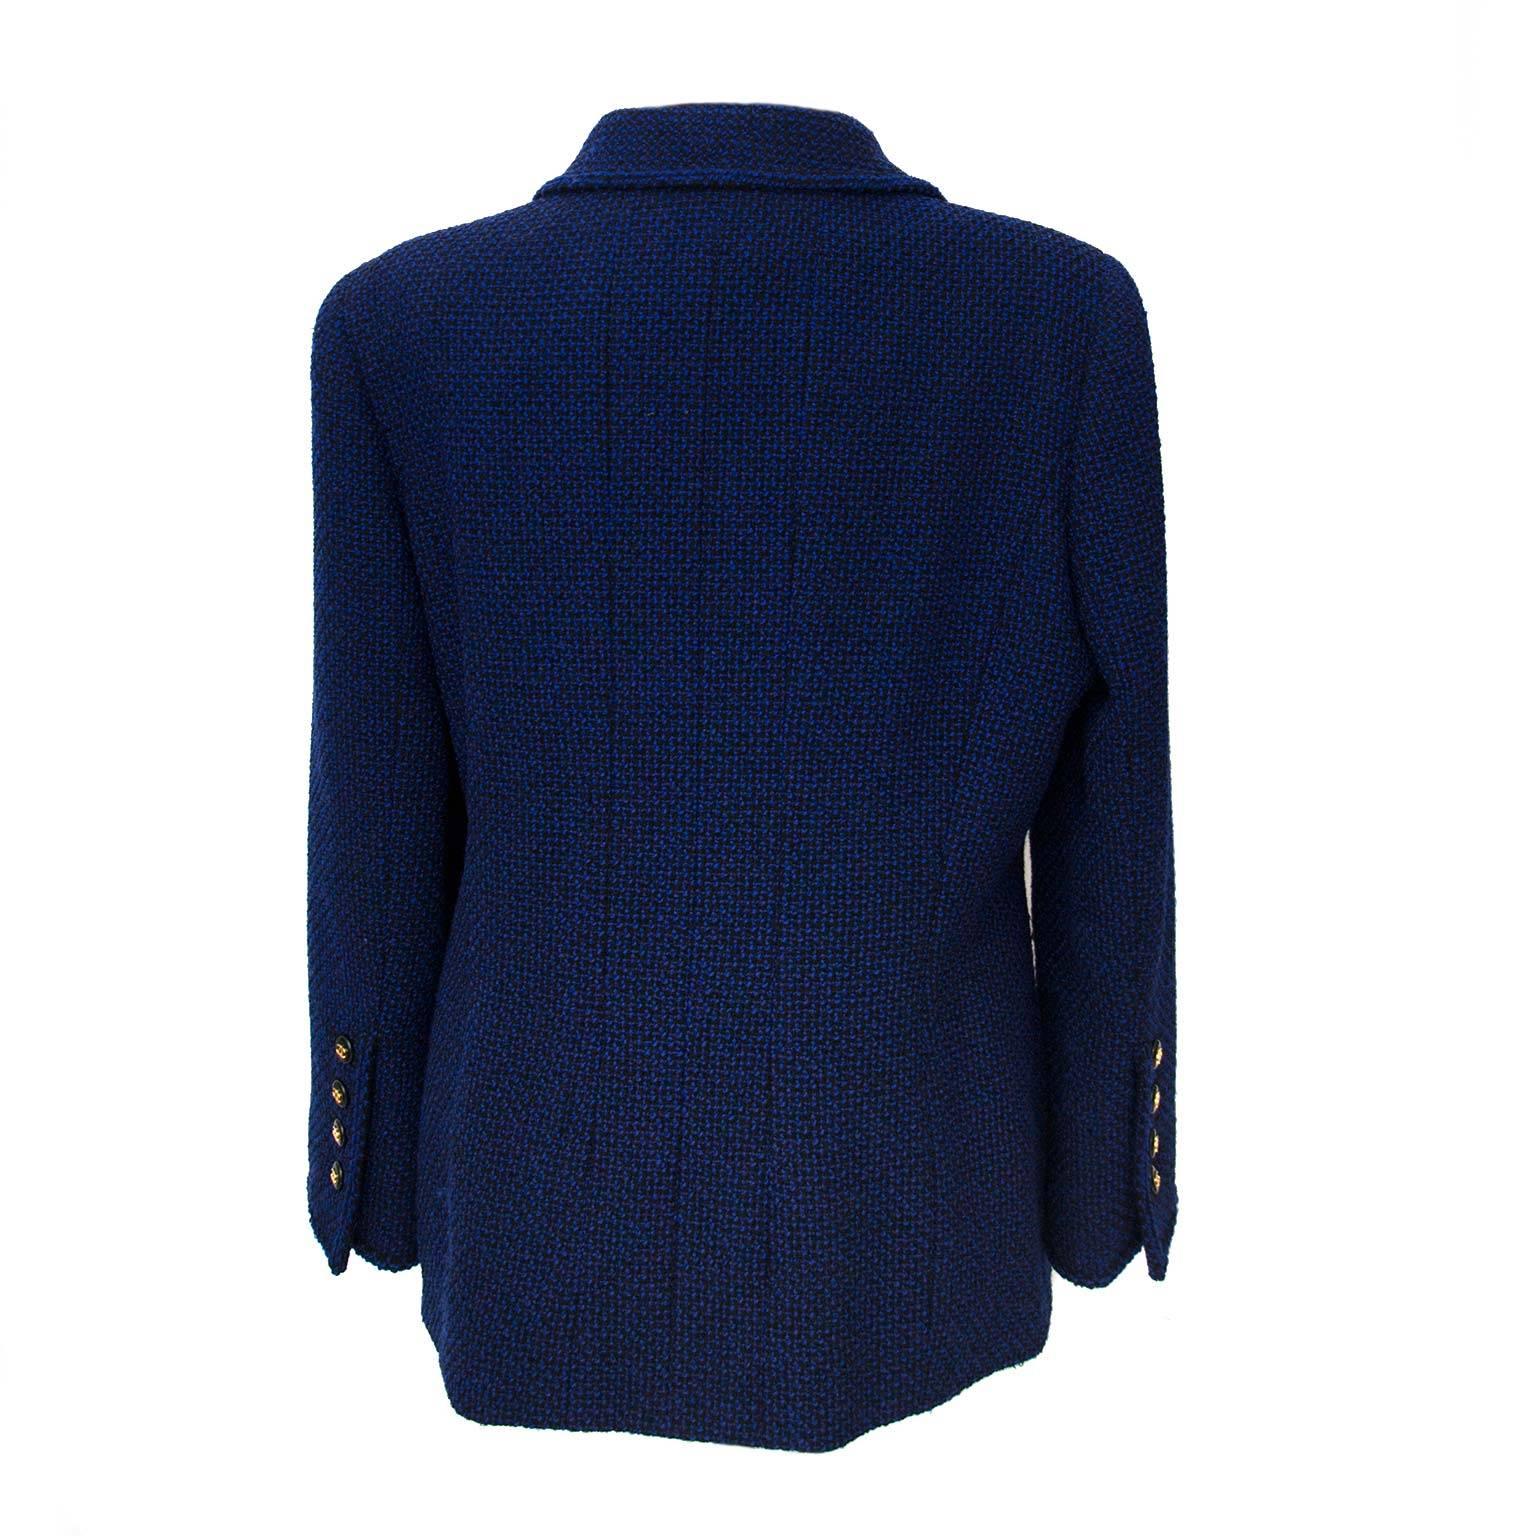 Excellent condition

Chanel Blue Tweed Jacket - Size 42

Chanel, one of the most established brands in the fashion industry, has always been known for its classic and elegant pieces.
This beautiful Chanel jacket definately plays tribute to its